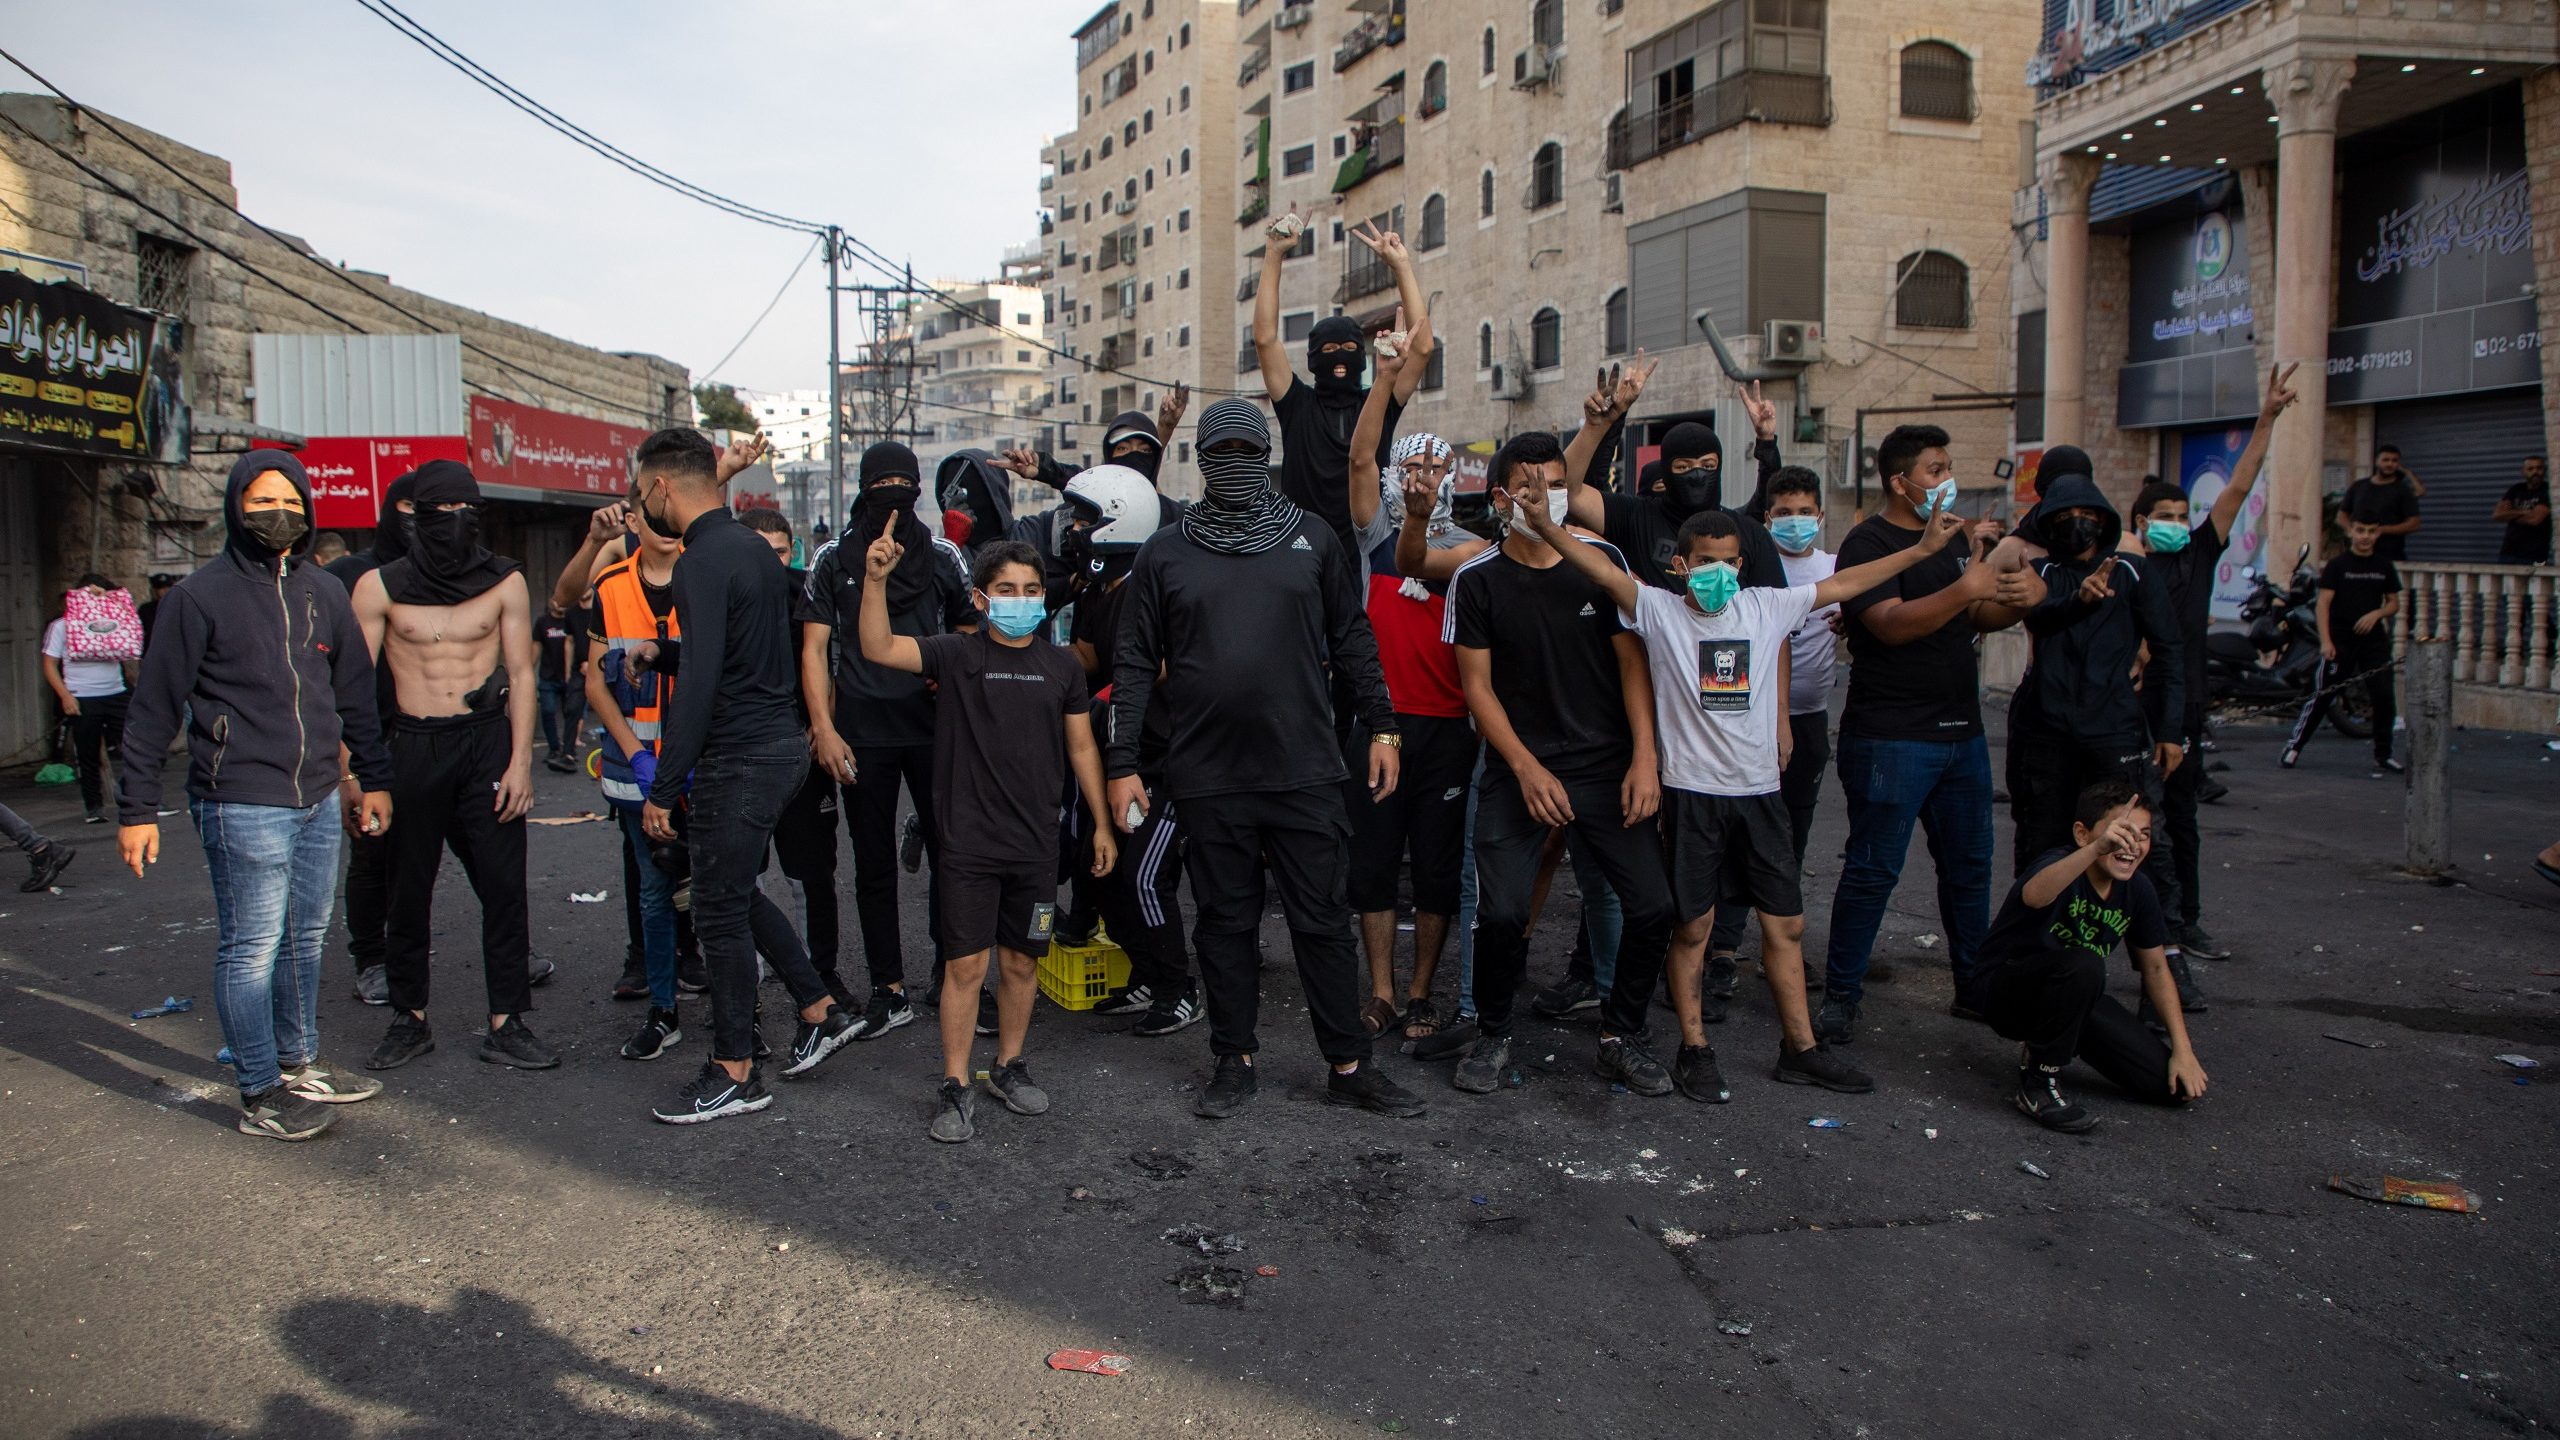 East Jerusalem Riots Quelled but Palestinian Groups Call for ‘Day of Rage’ on Friday